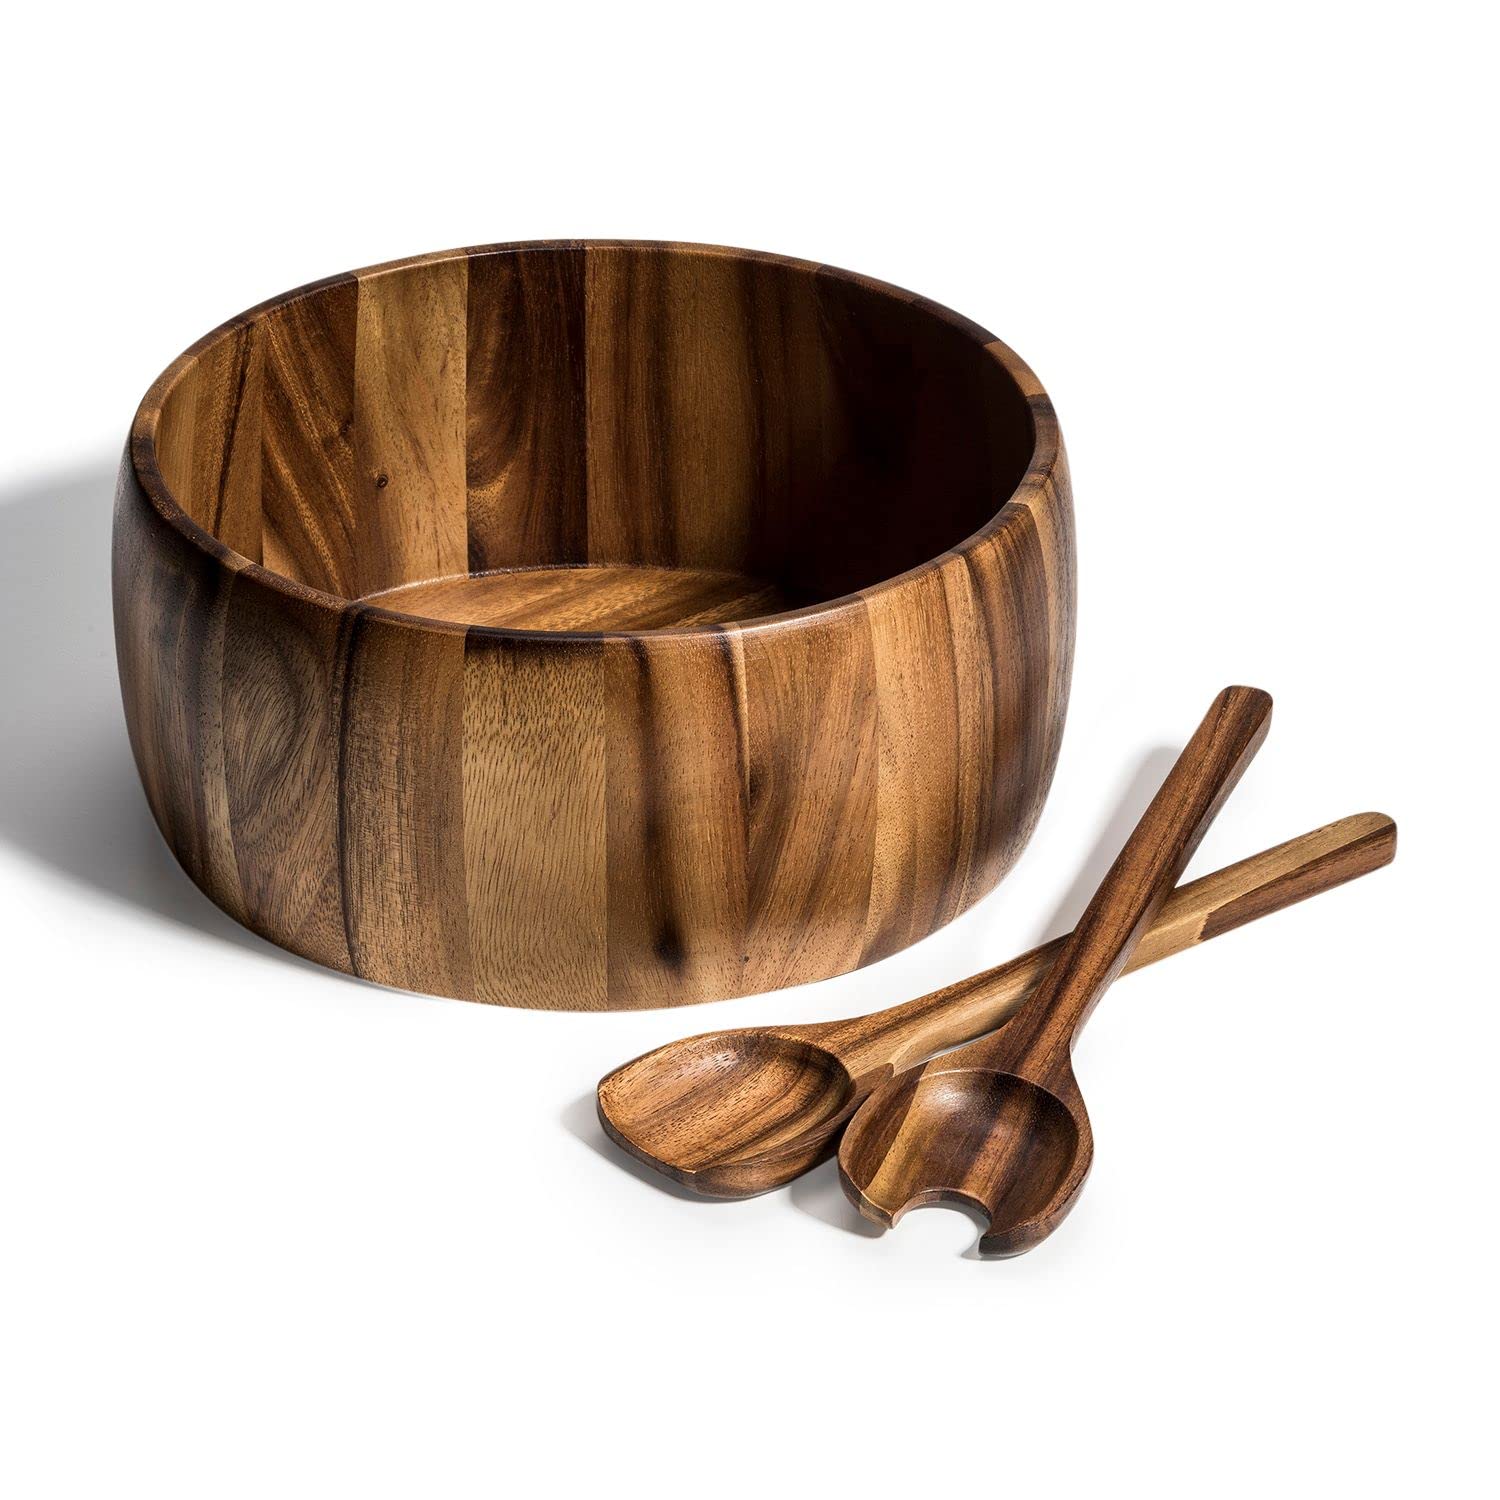 Kalmar Home 12-Inch Acacia Wood Extra Large Smooth Salad Bowl with Servers